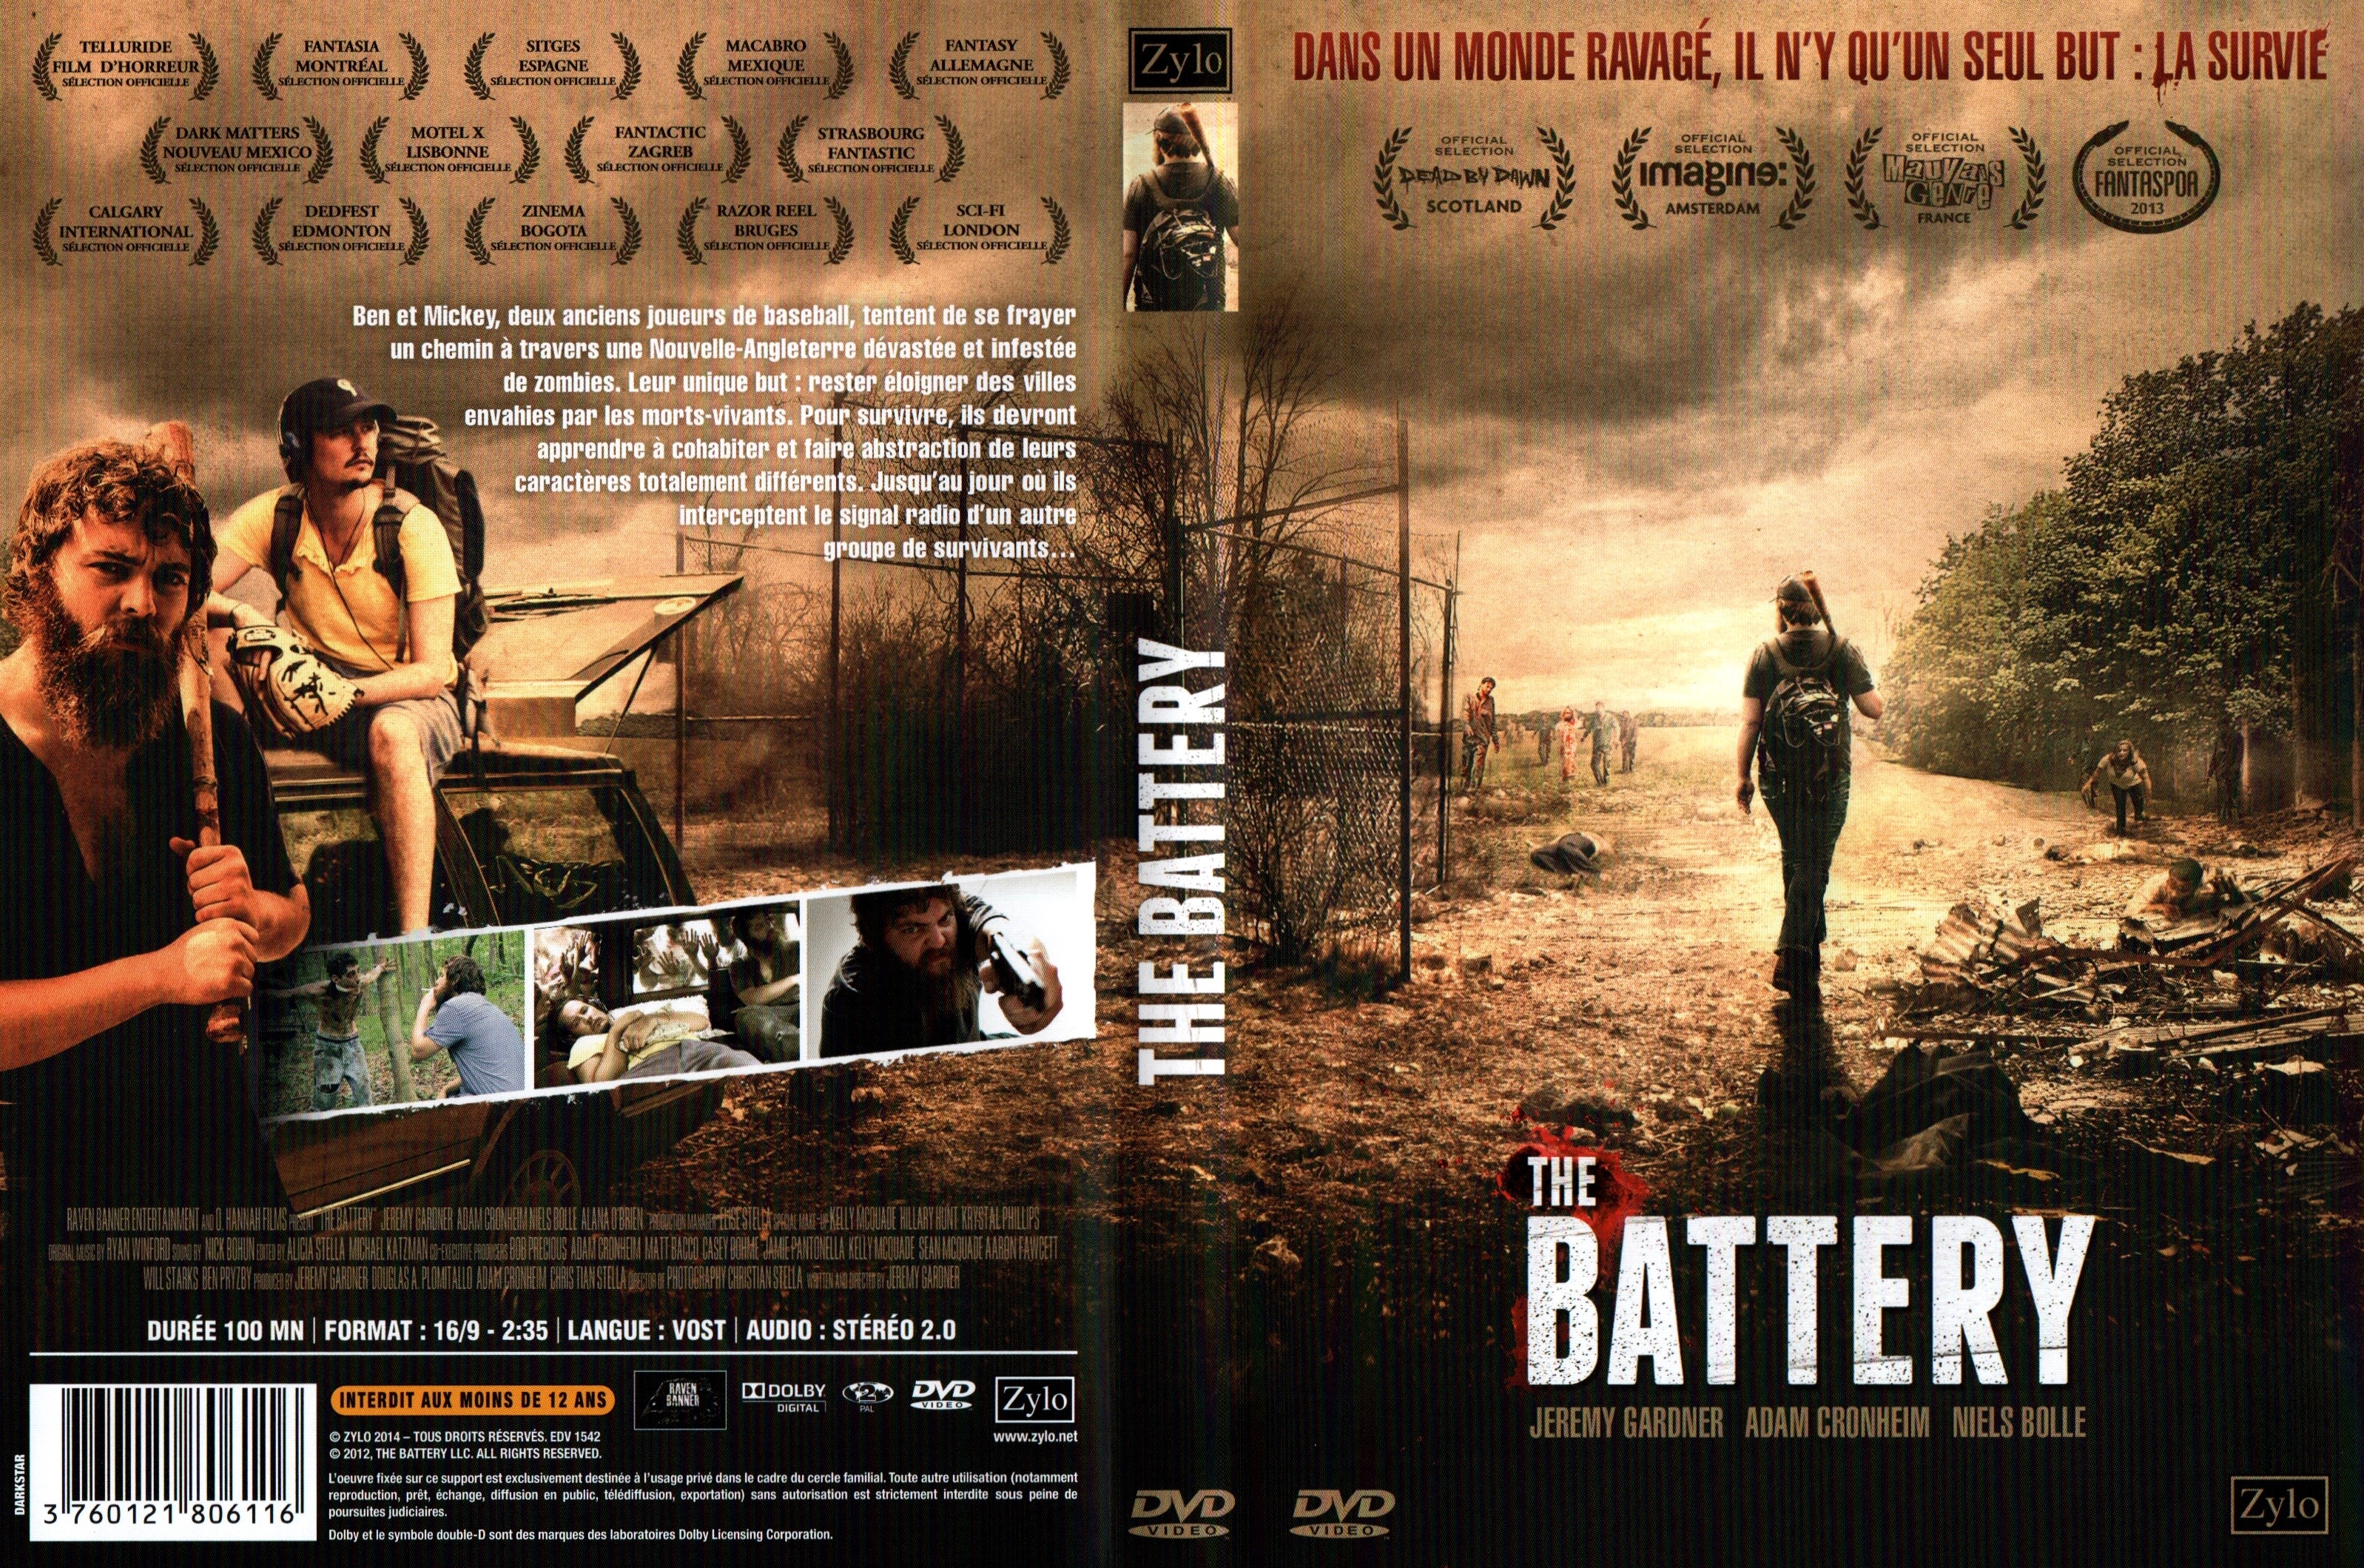 Jaquette DVD The battery